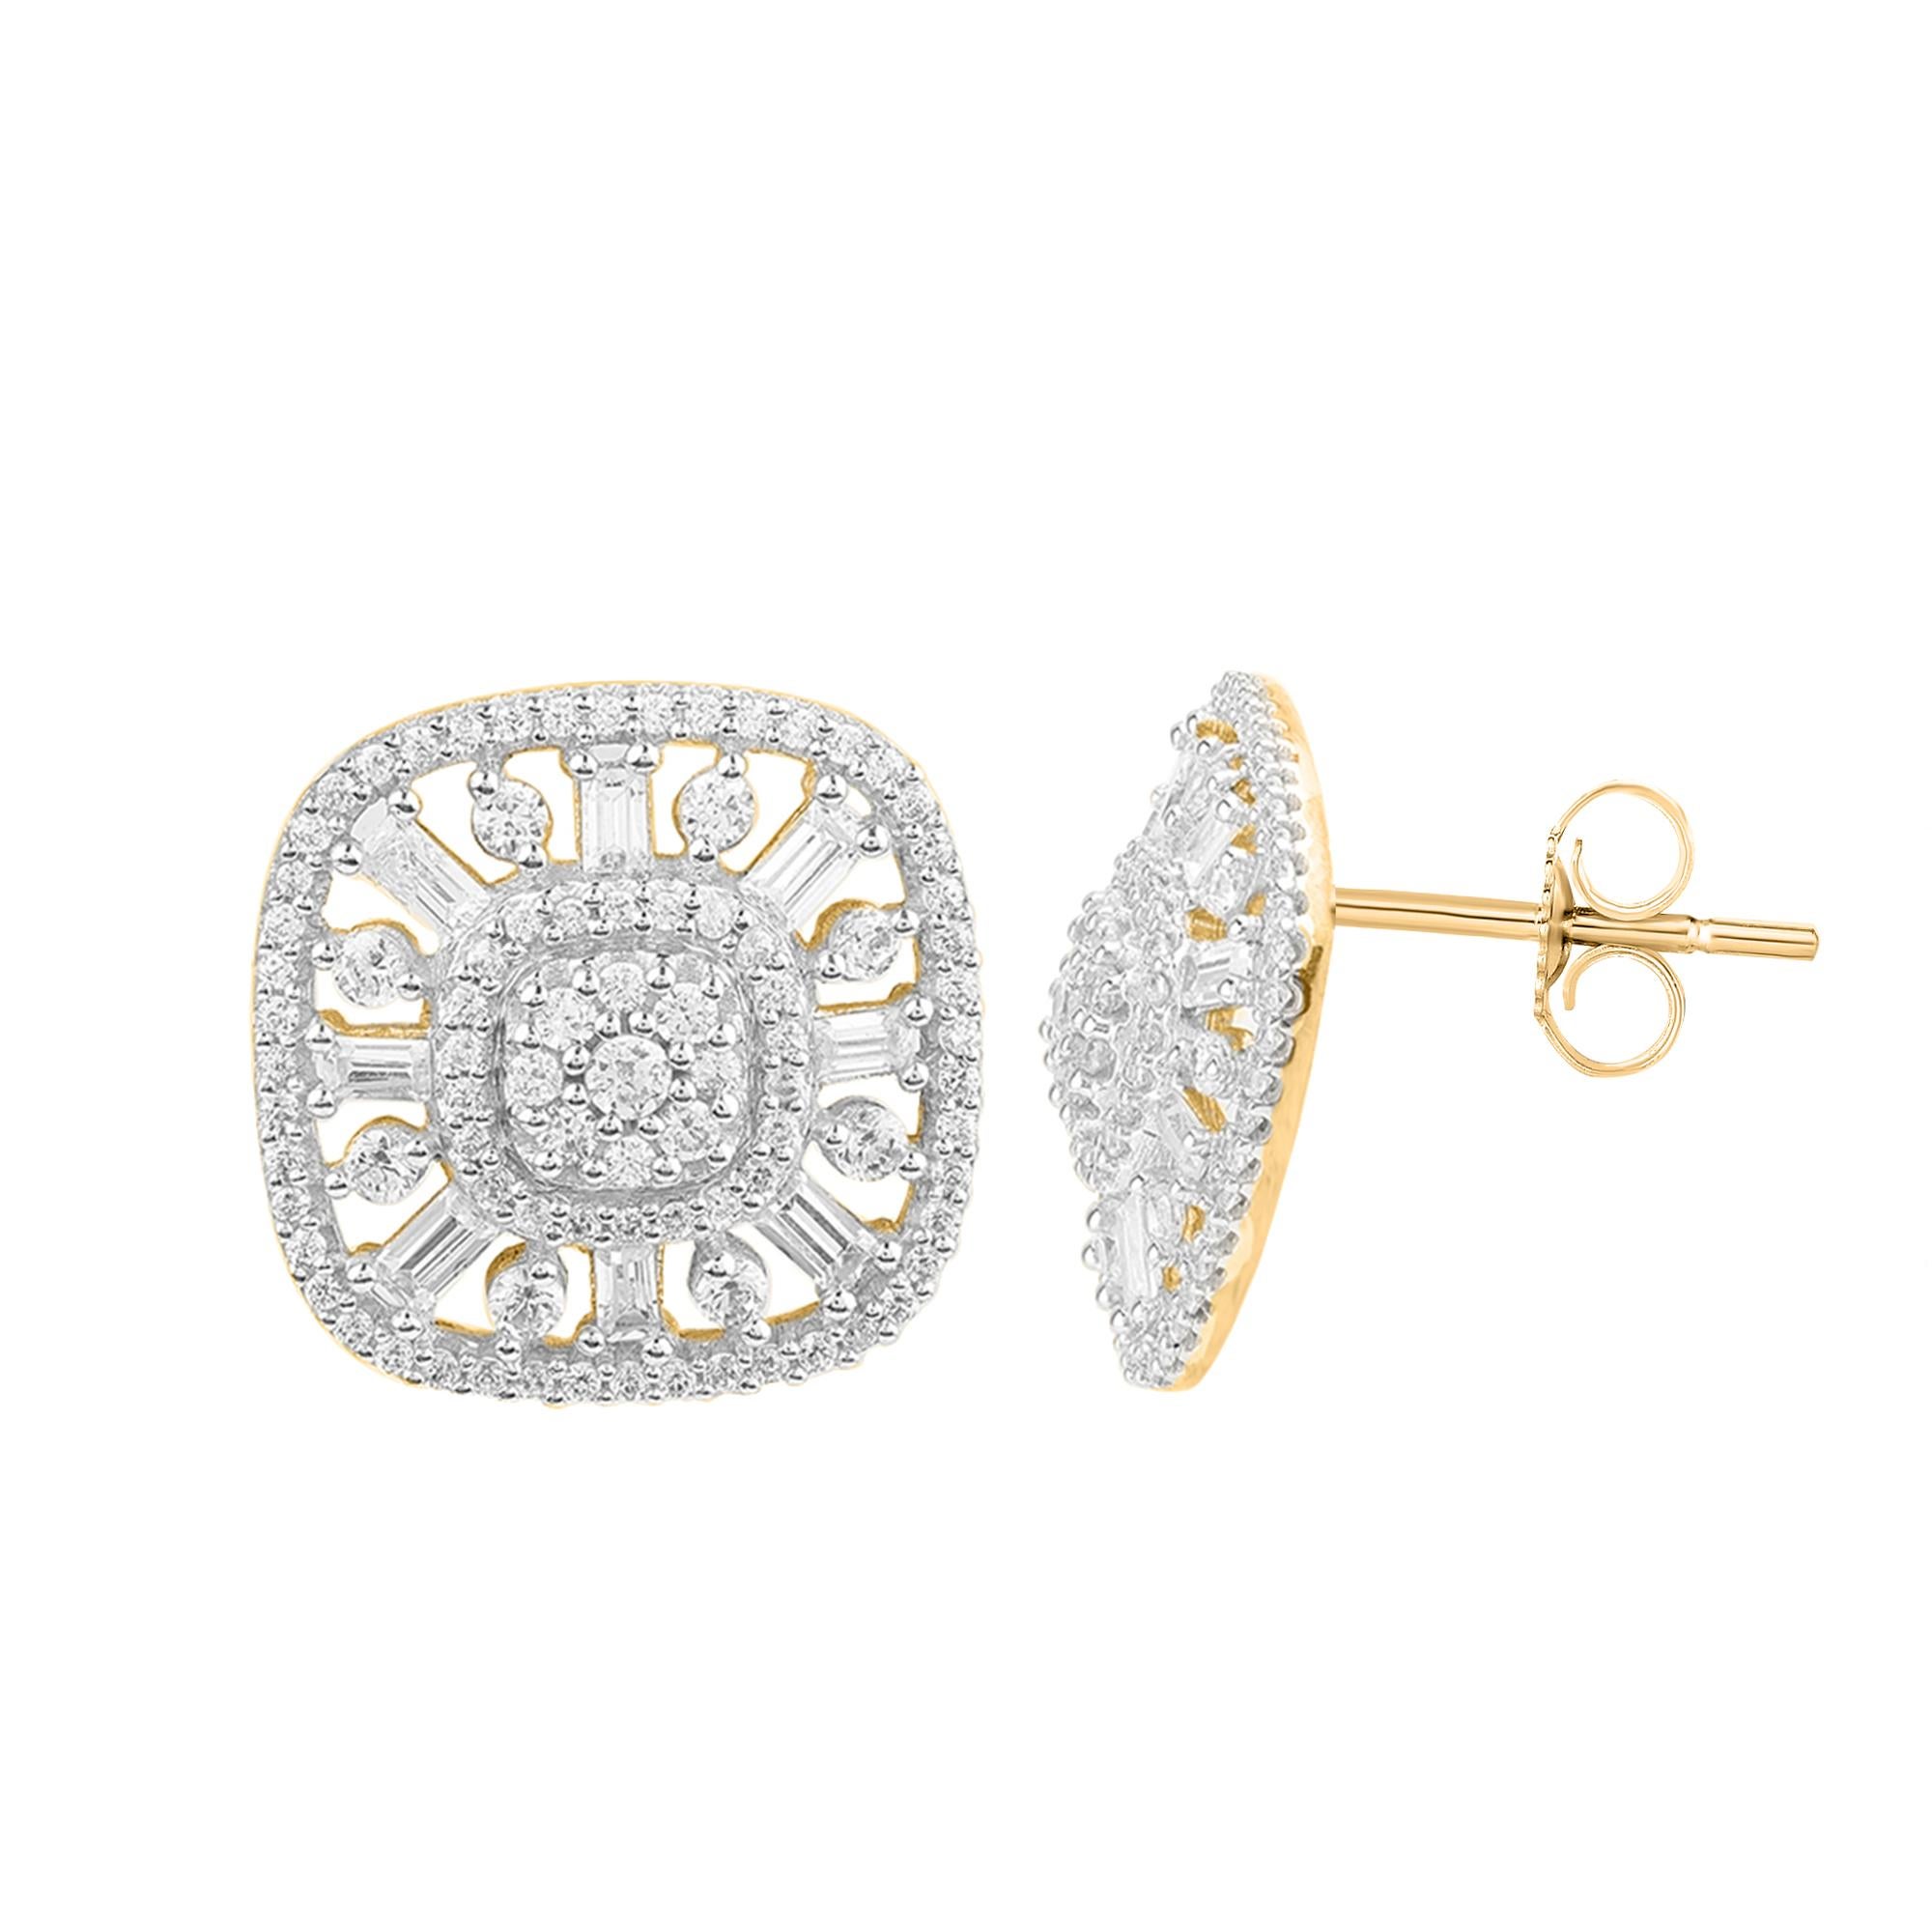 Adorn your formal wear with extra glitz when you put on these diamond frame stud earrings. Expertly crafted in 14 karat Yellow Gold, earring is cleverly filled with 190 single cut, brilliant cut round diamonds and baguette diamonds in prong & half